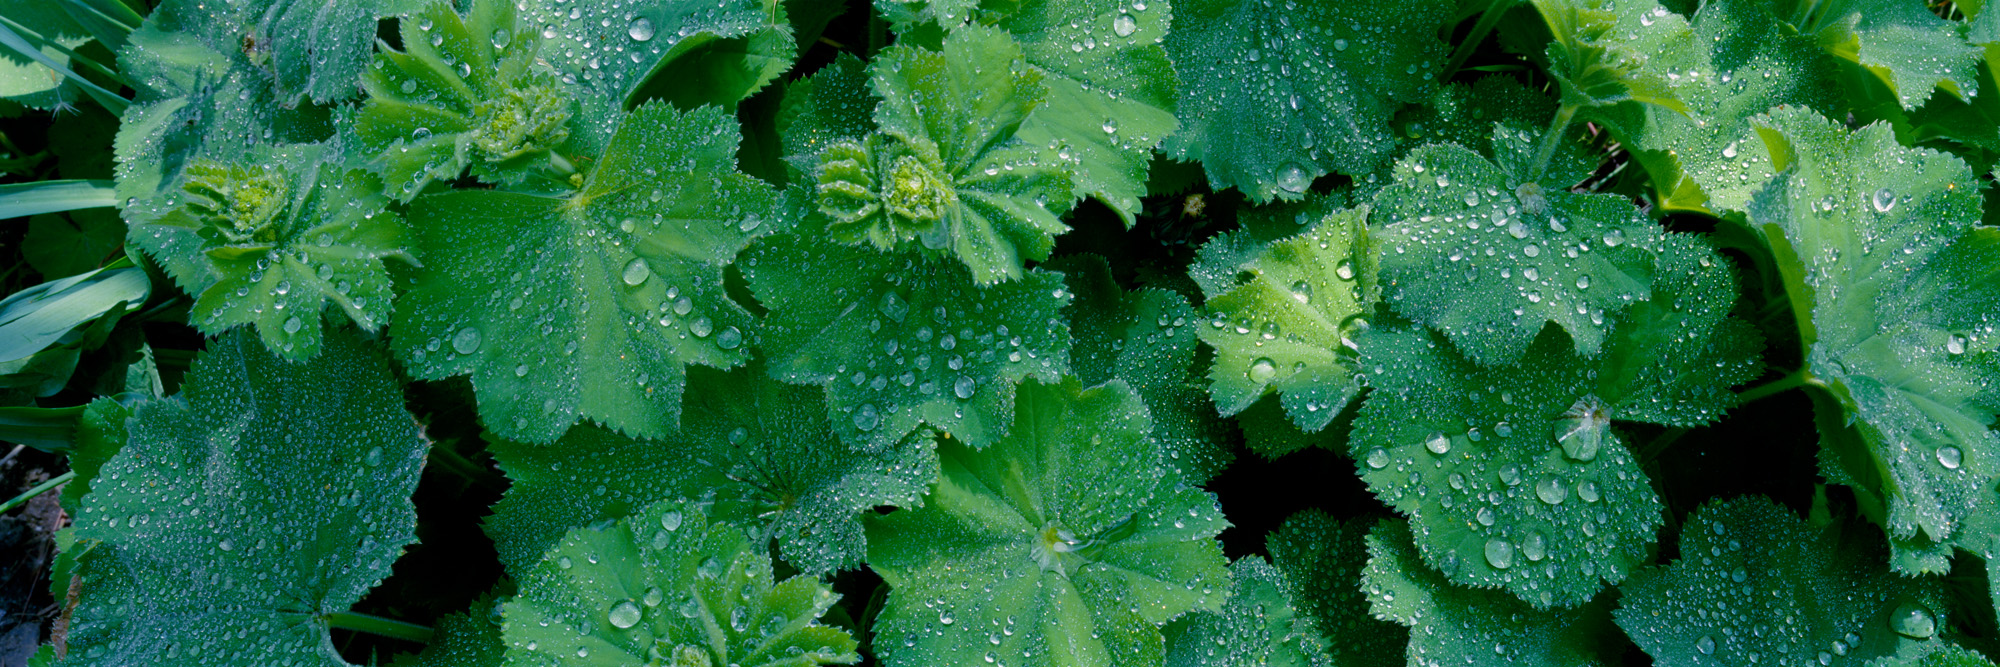 fallow land, landscape, nature, analogue photography, large format, panoramic photography, Markus Bollen, 6x17, green, life, growth, peace, rest, lady's mantle tears, lady's mantle, dew, water,